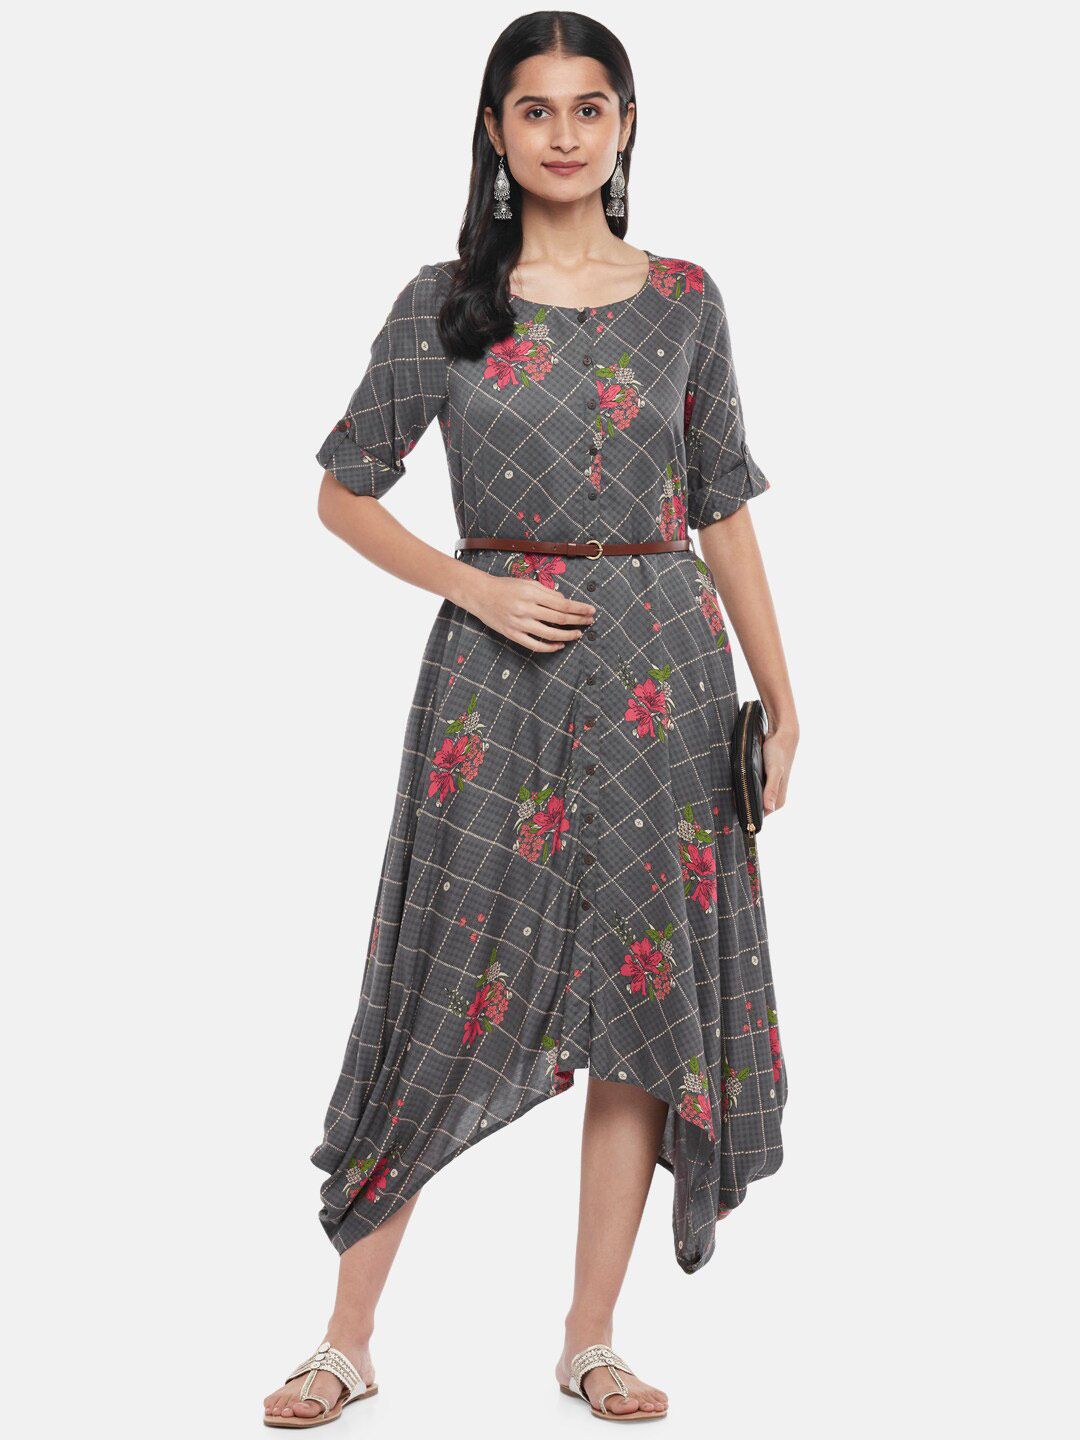 AKKRITI BY PANTALOONS Charcoal Floral A-Line Midi Dress Price in India